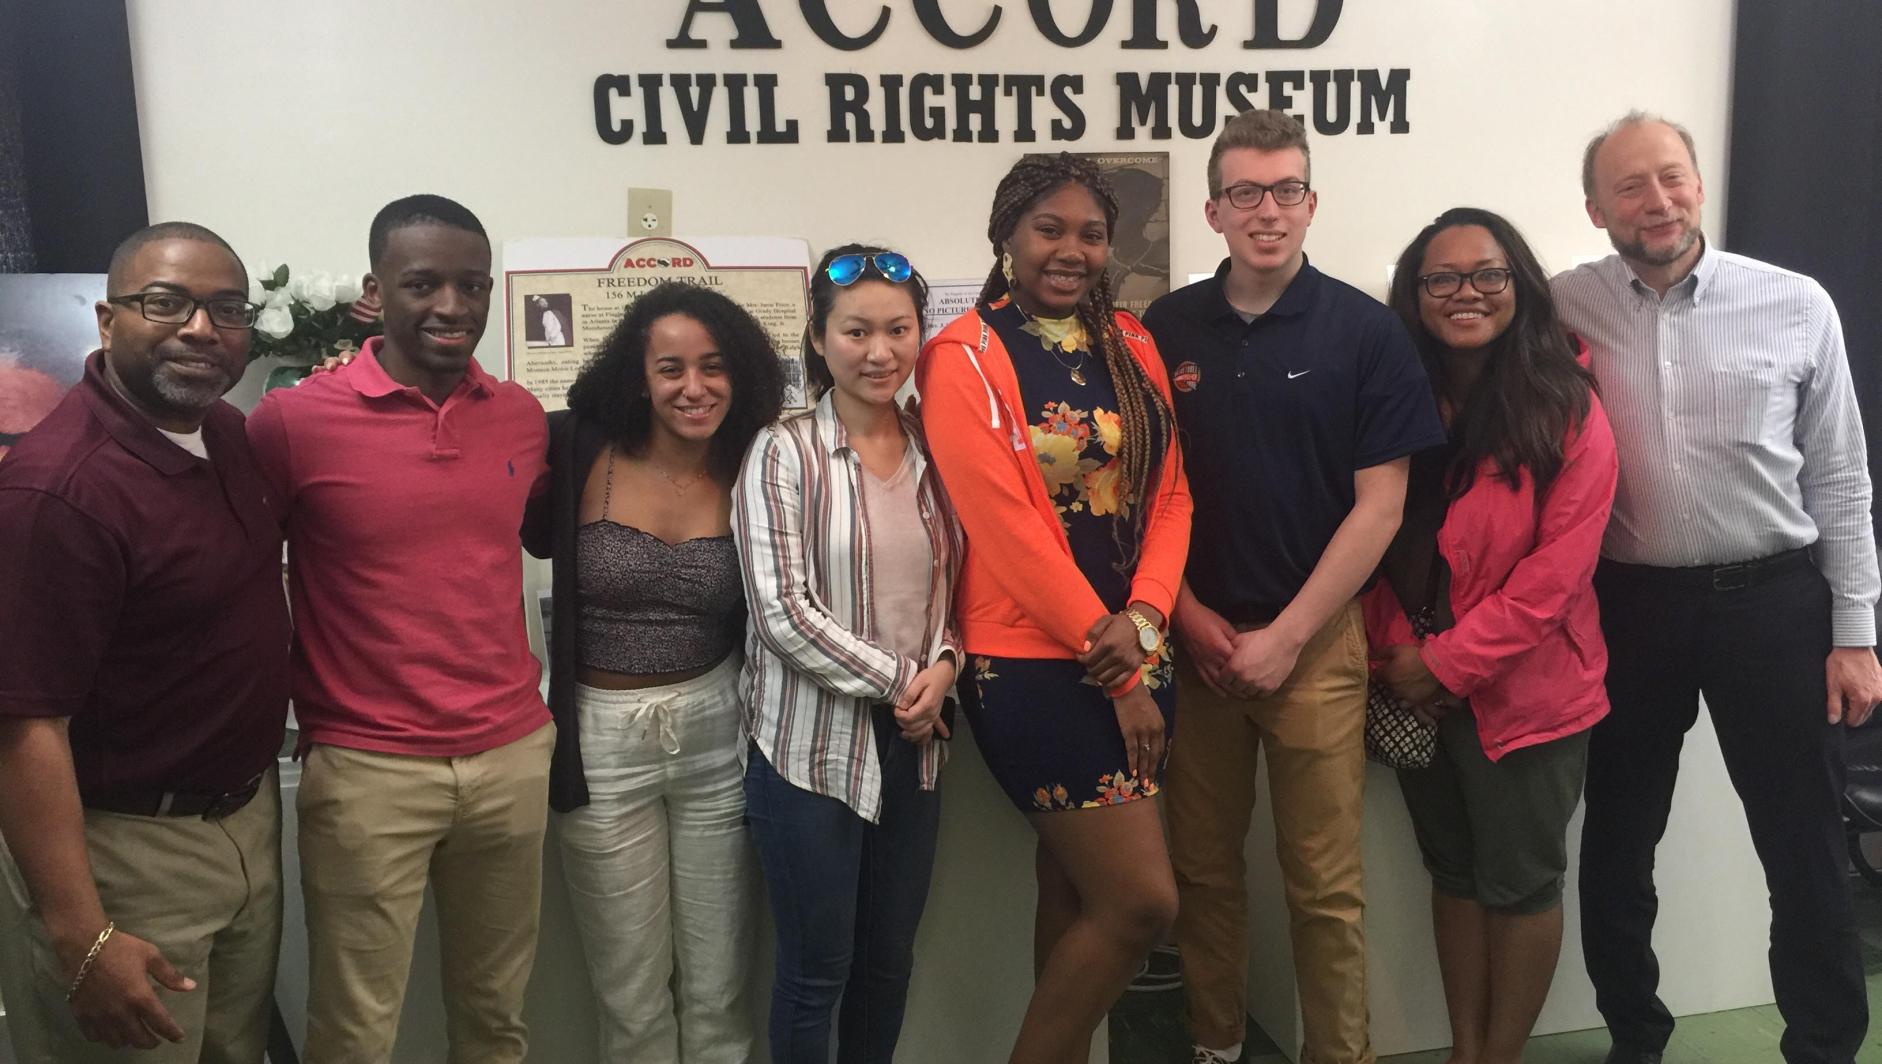 Students pose in the Accord Civil Rights Museum